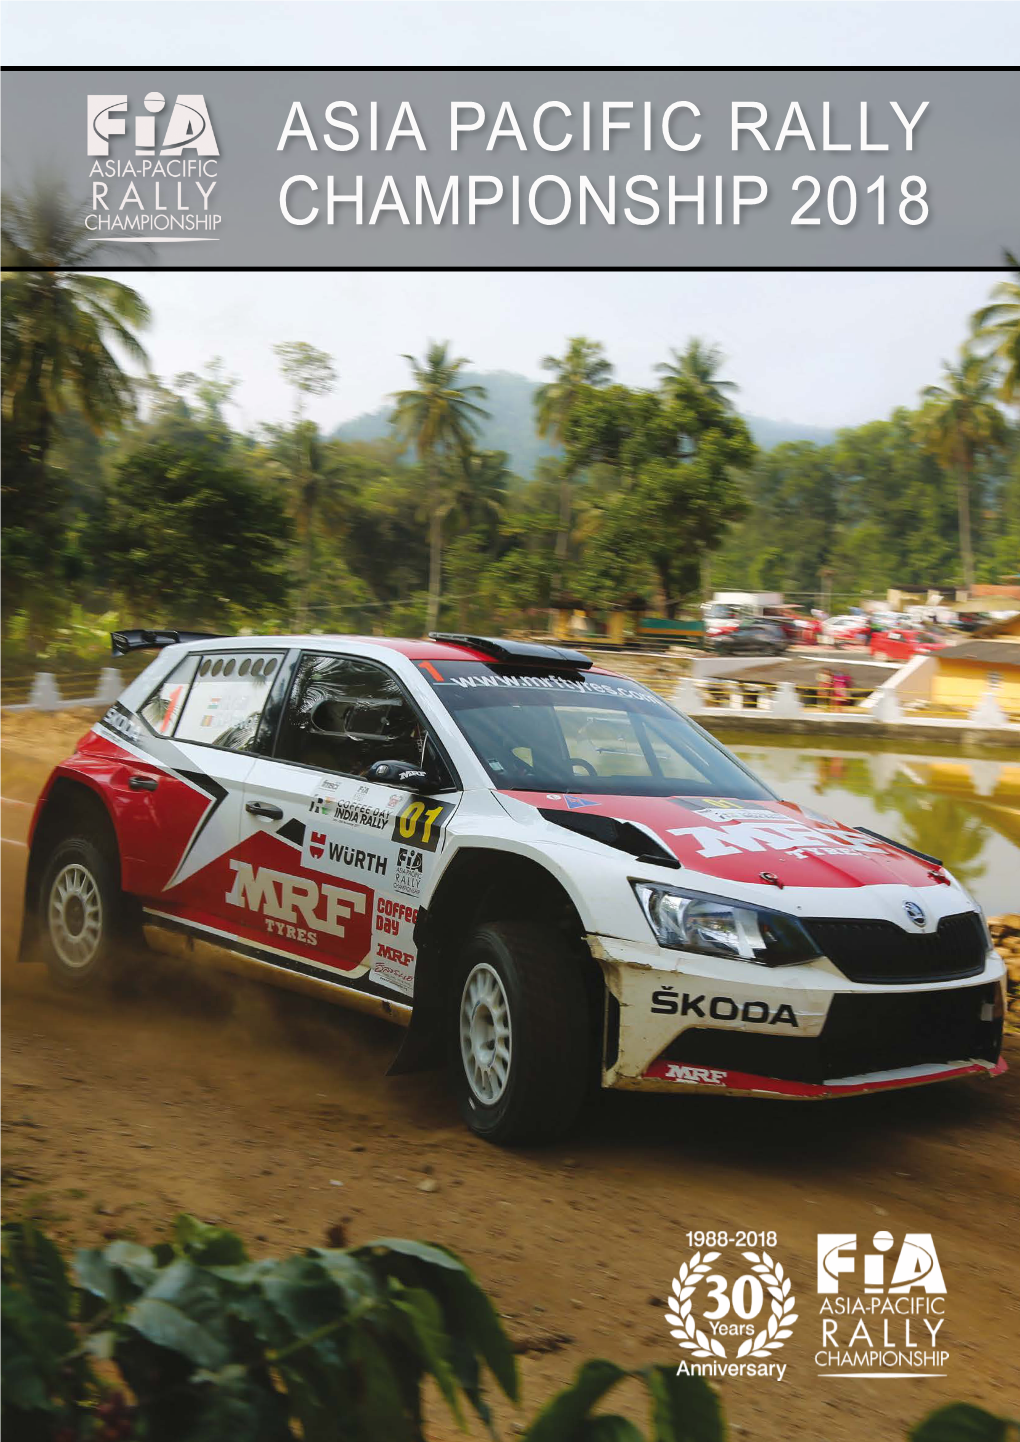 Asia Pacific Rally Championship 2018